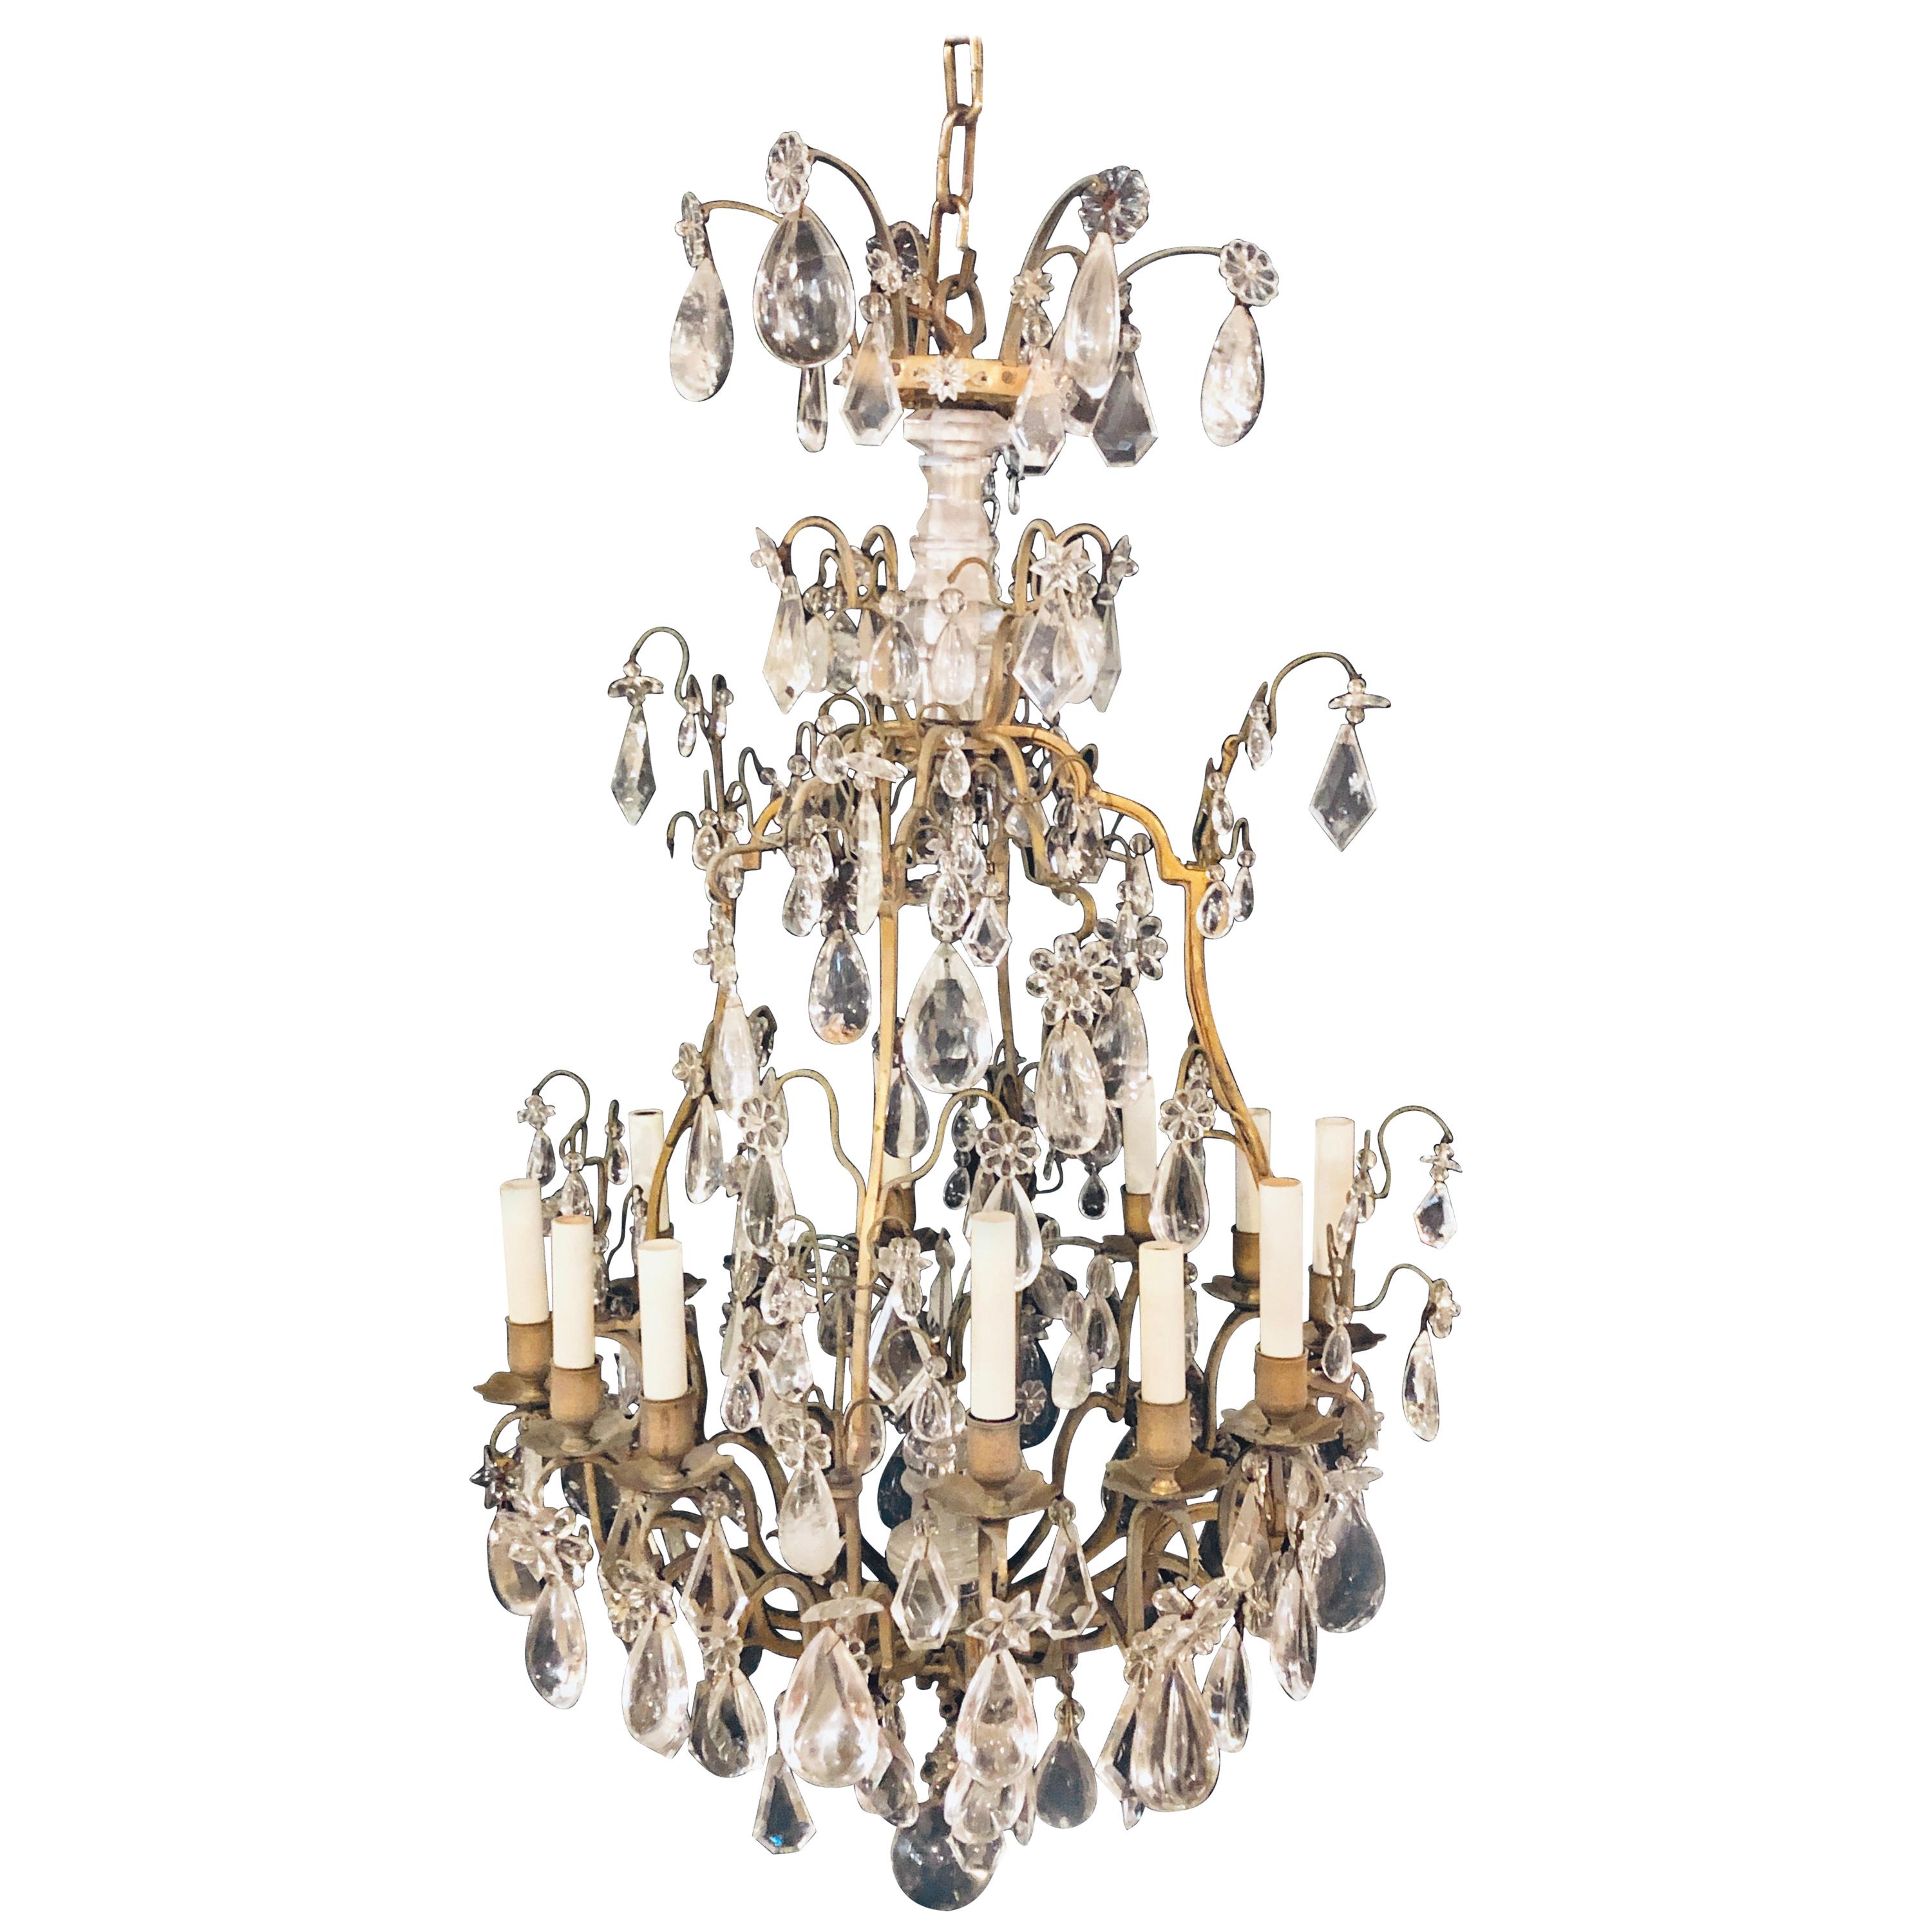 19th-20th Century Louis XVI Style 12 Light Bronze and Rock Crystal Chandelier